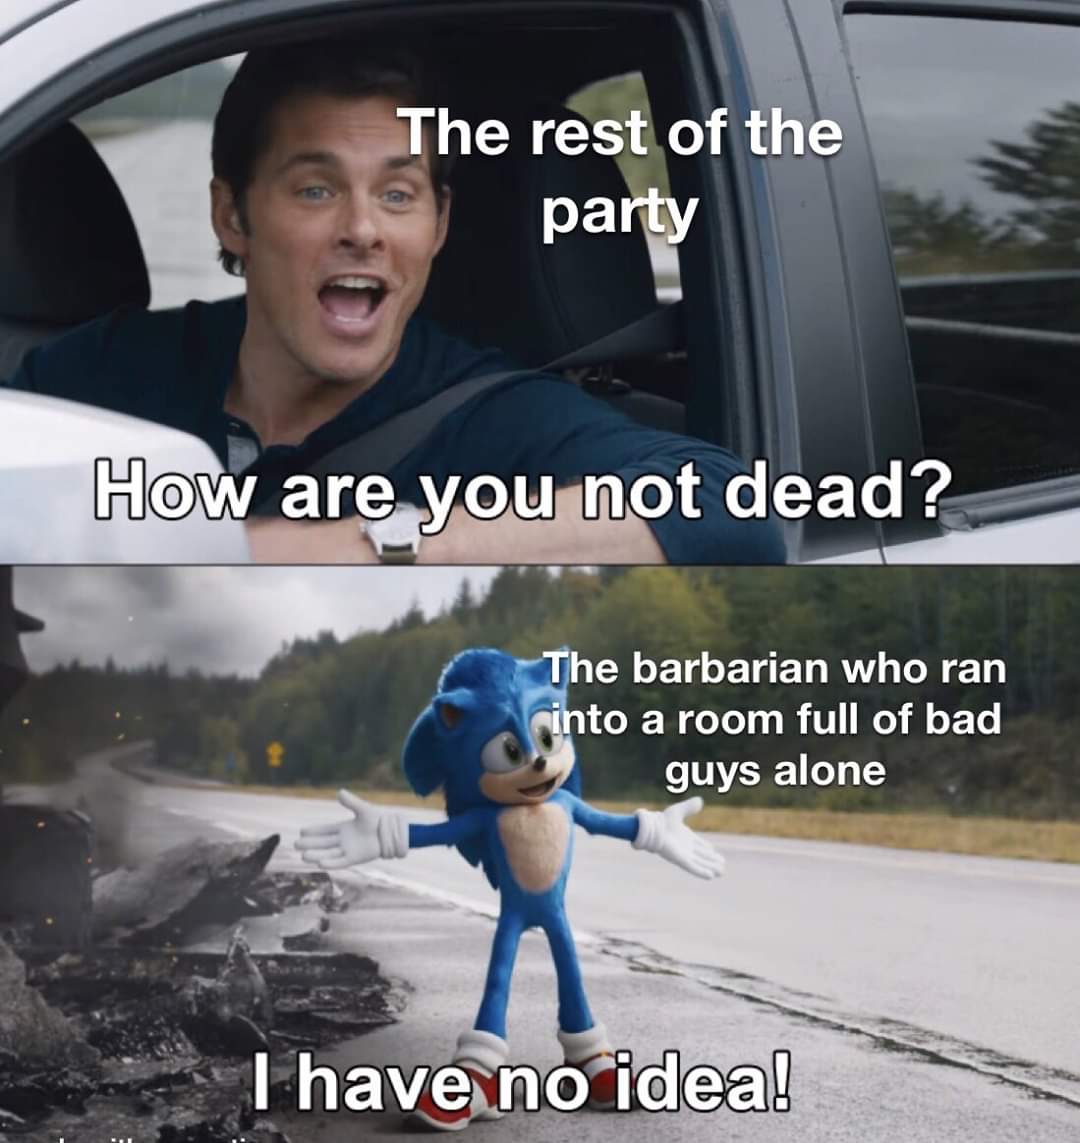 you not dead sonic meme template - The rest of the party How are you not dead? The barbarian who ran cinto a room full of bad guys alone I have no idea!